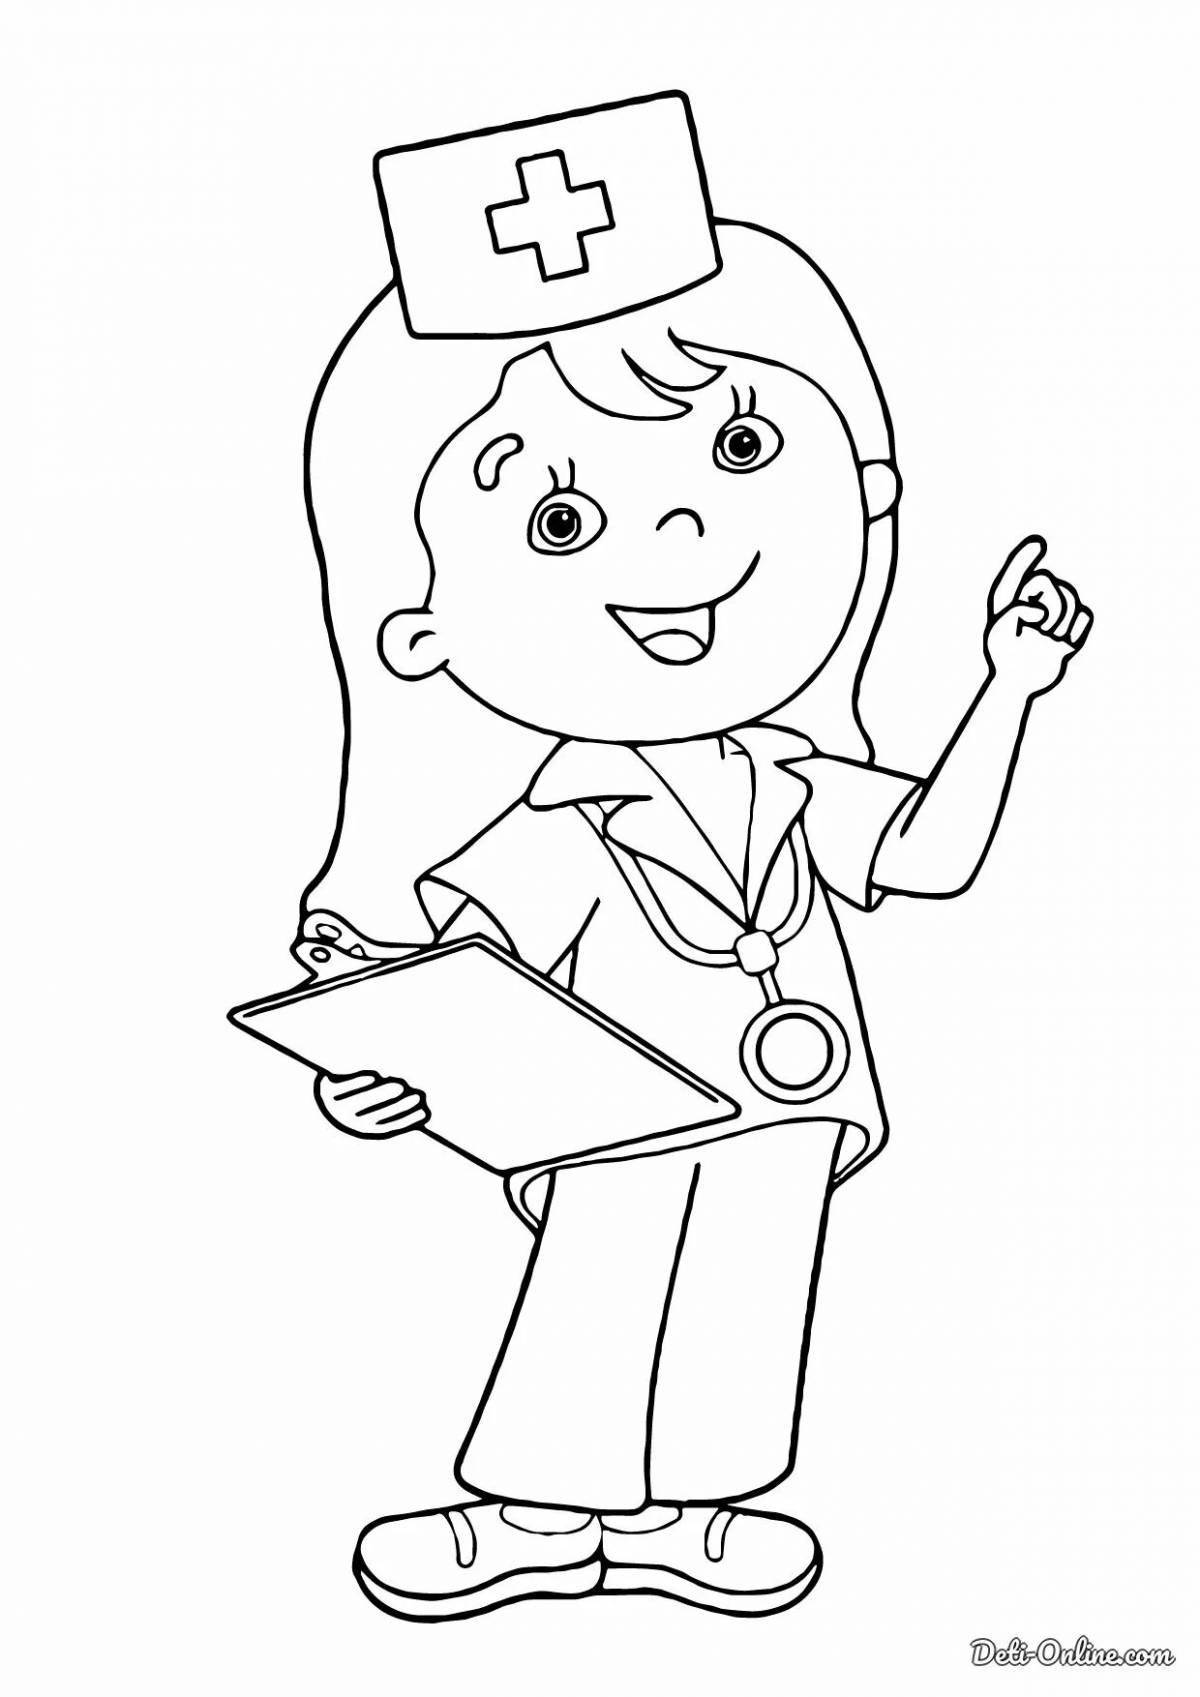 Coloring book funny doctor profession